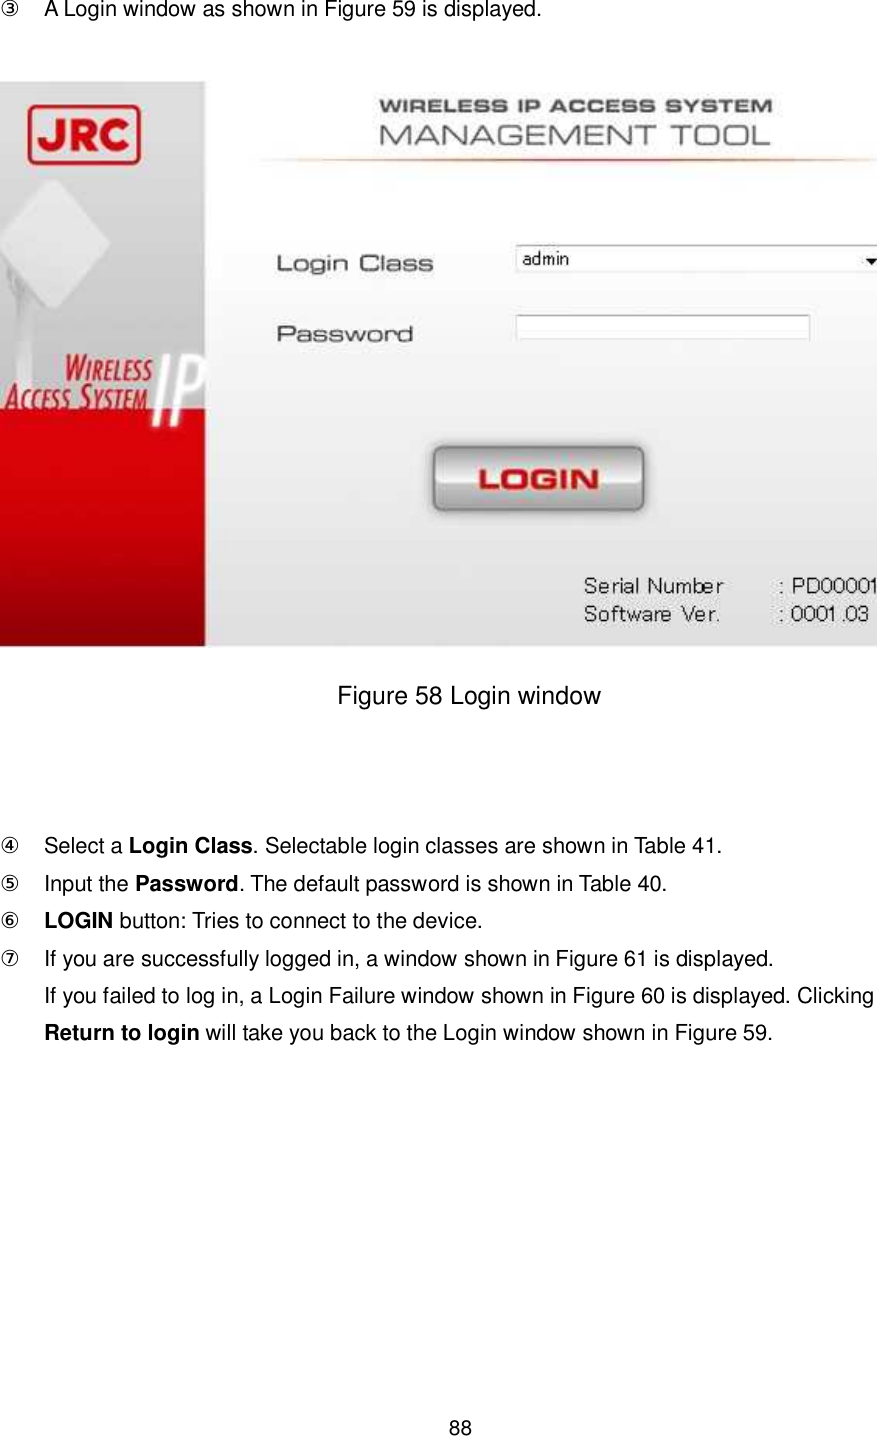    88   ③ A Login window as shown in Figure 59 is displayed.   Figure 58 Login window    ④ Select a Login Class. Selectable login classes are shown in Table 41. ⑤ Input the Password. The default password is shown in Table 40. ⑥ LOGIN button: Tries to connect to the device. ⑦ If you are successfully logged in, a window shown in Figure 61 is displayed. If you failed to log in, a Login Failure window shown in Figure 60 is displayed. Clicking Return to login will take you back to the Login window shown in Figure 59.    